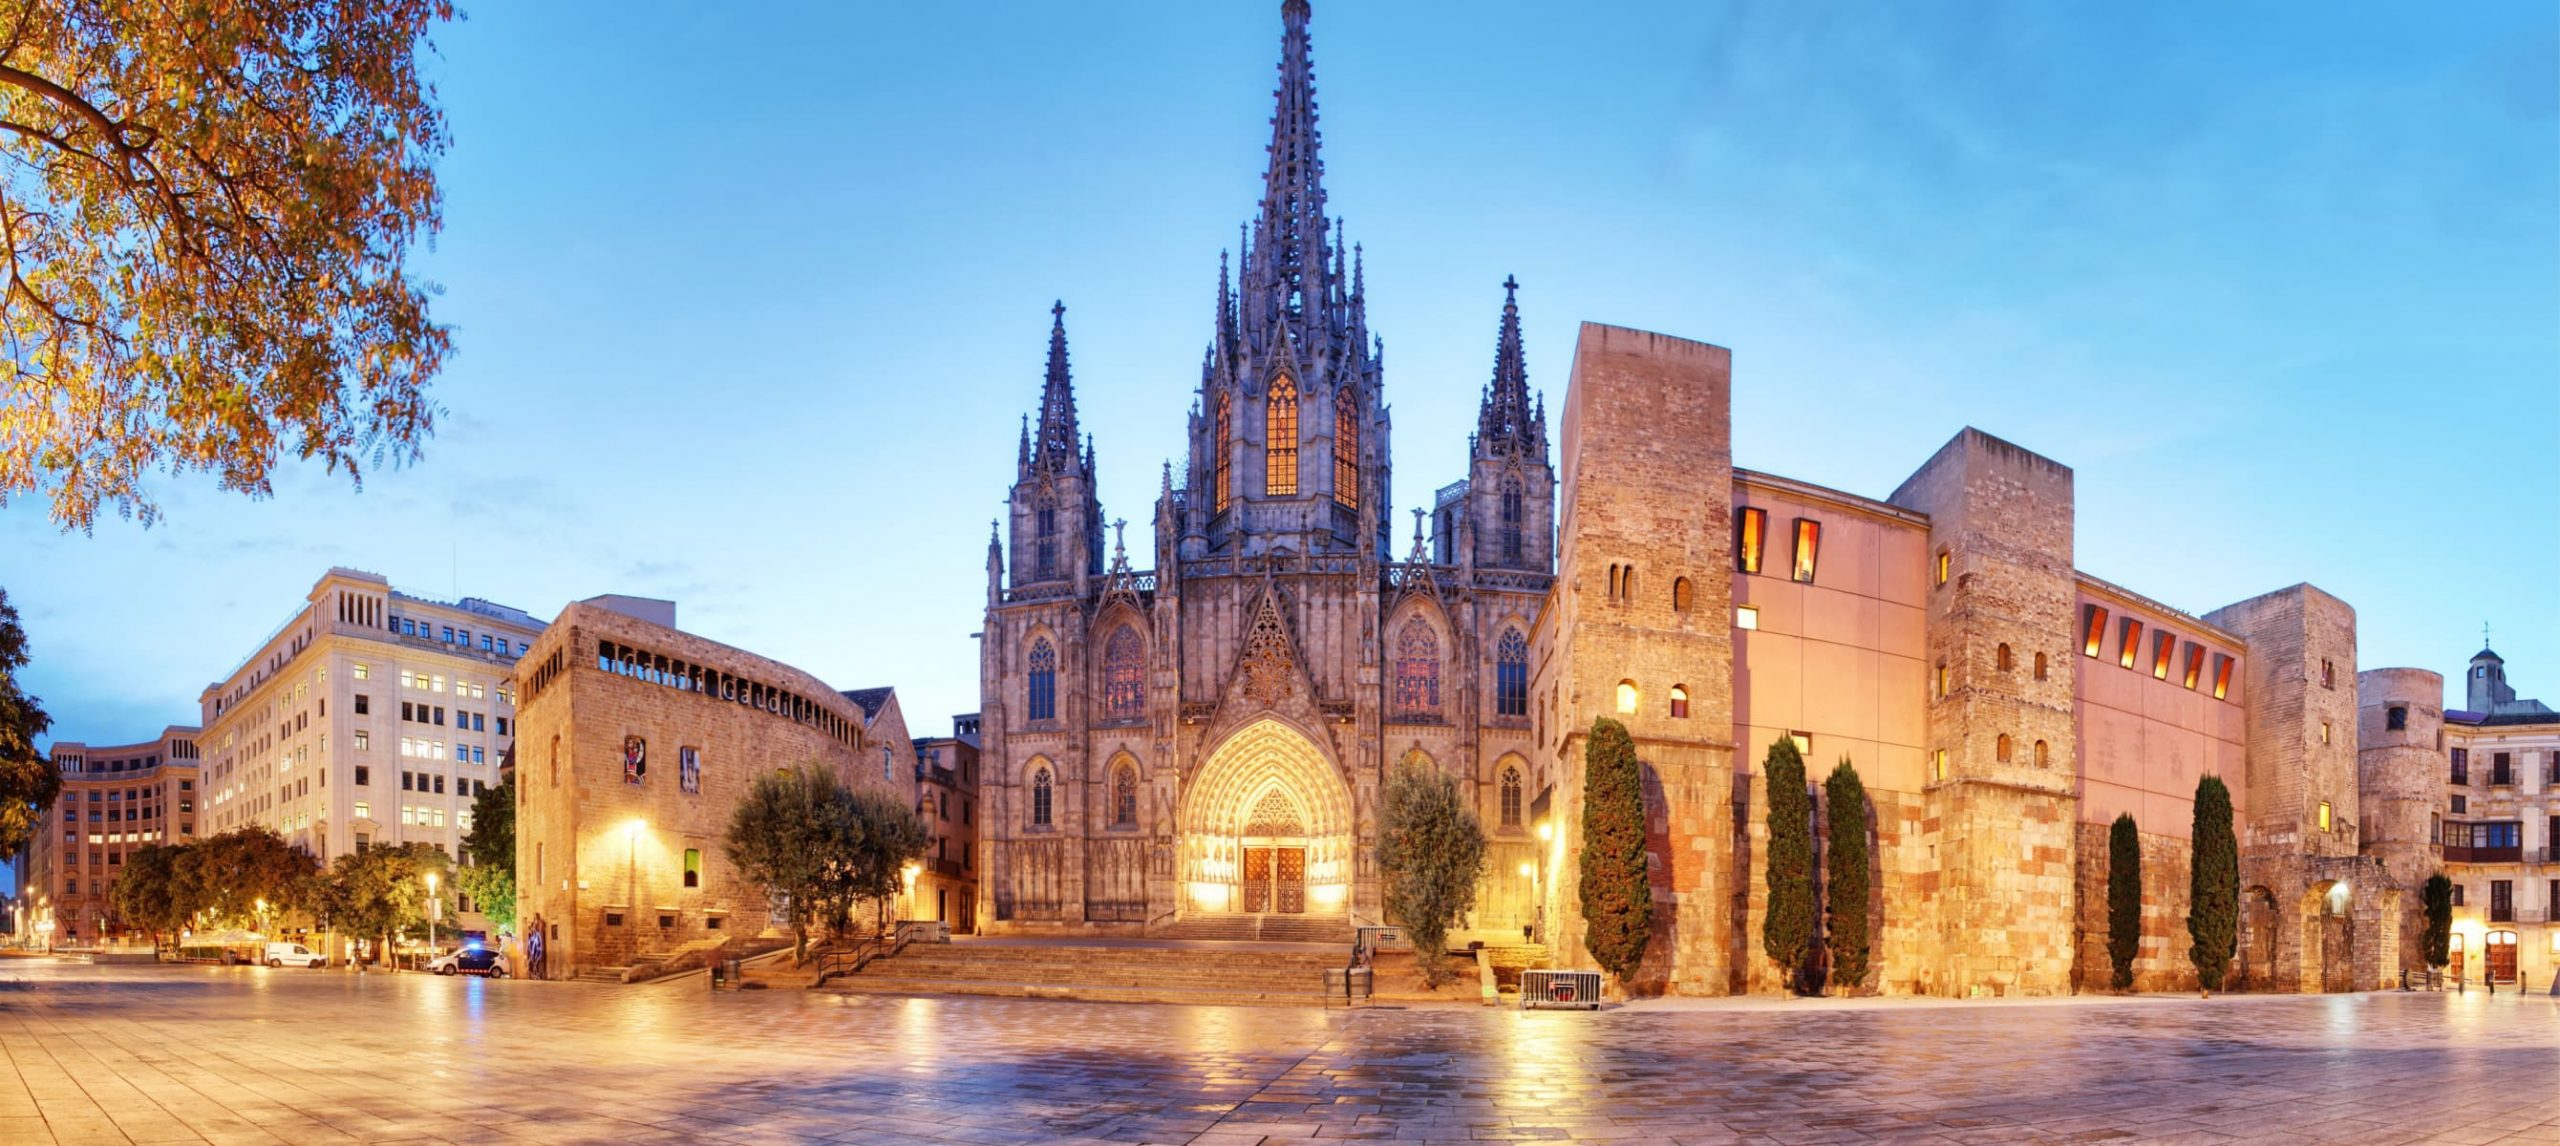 The 5 Best Hotels in the Gothic Quarter, Barcelona